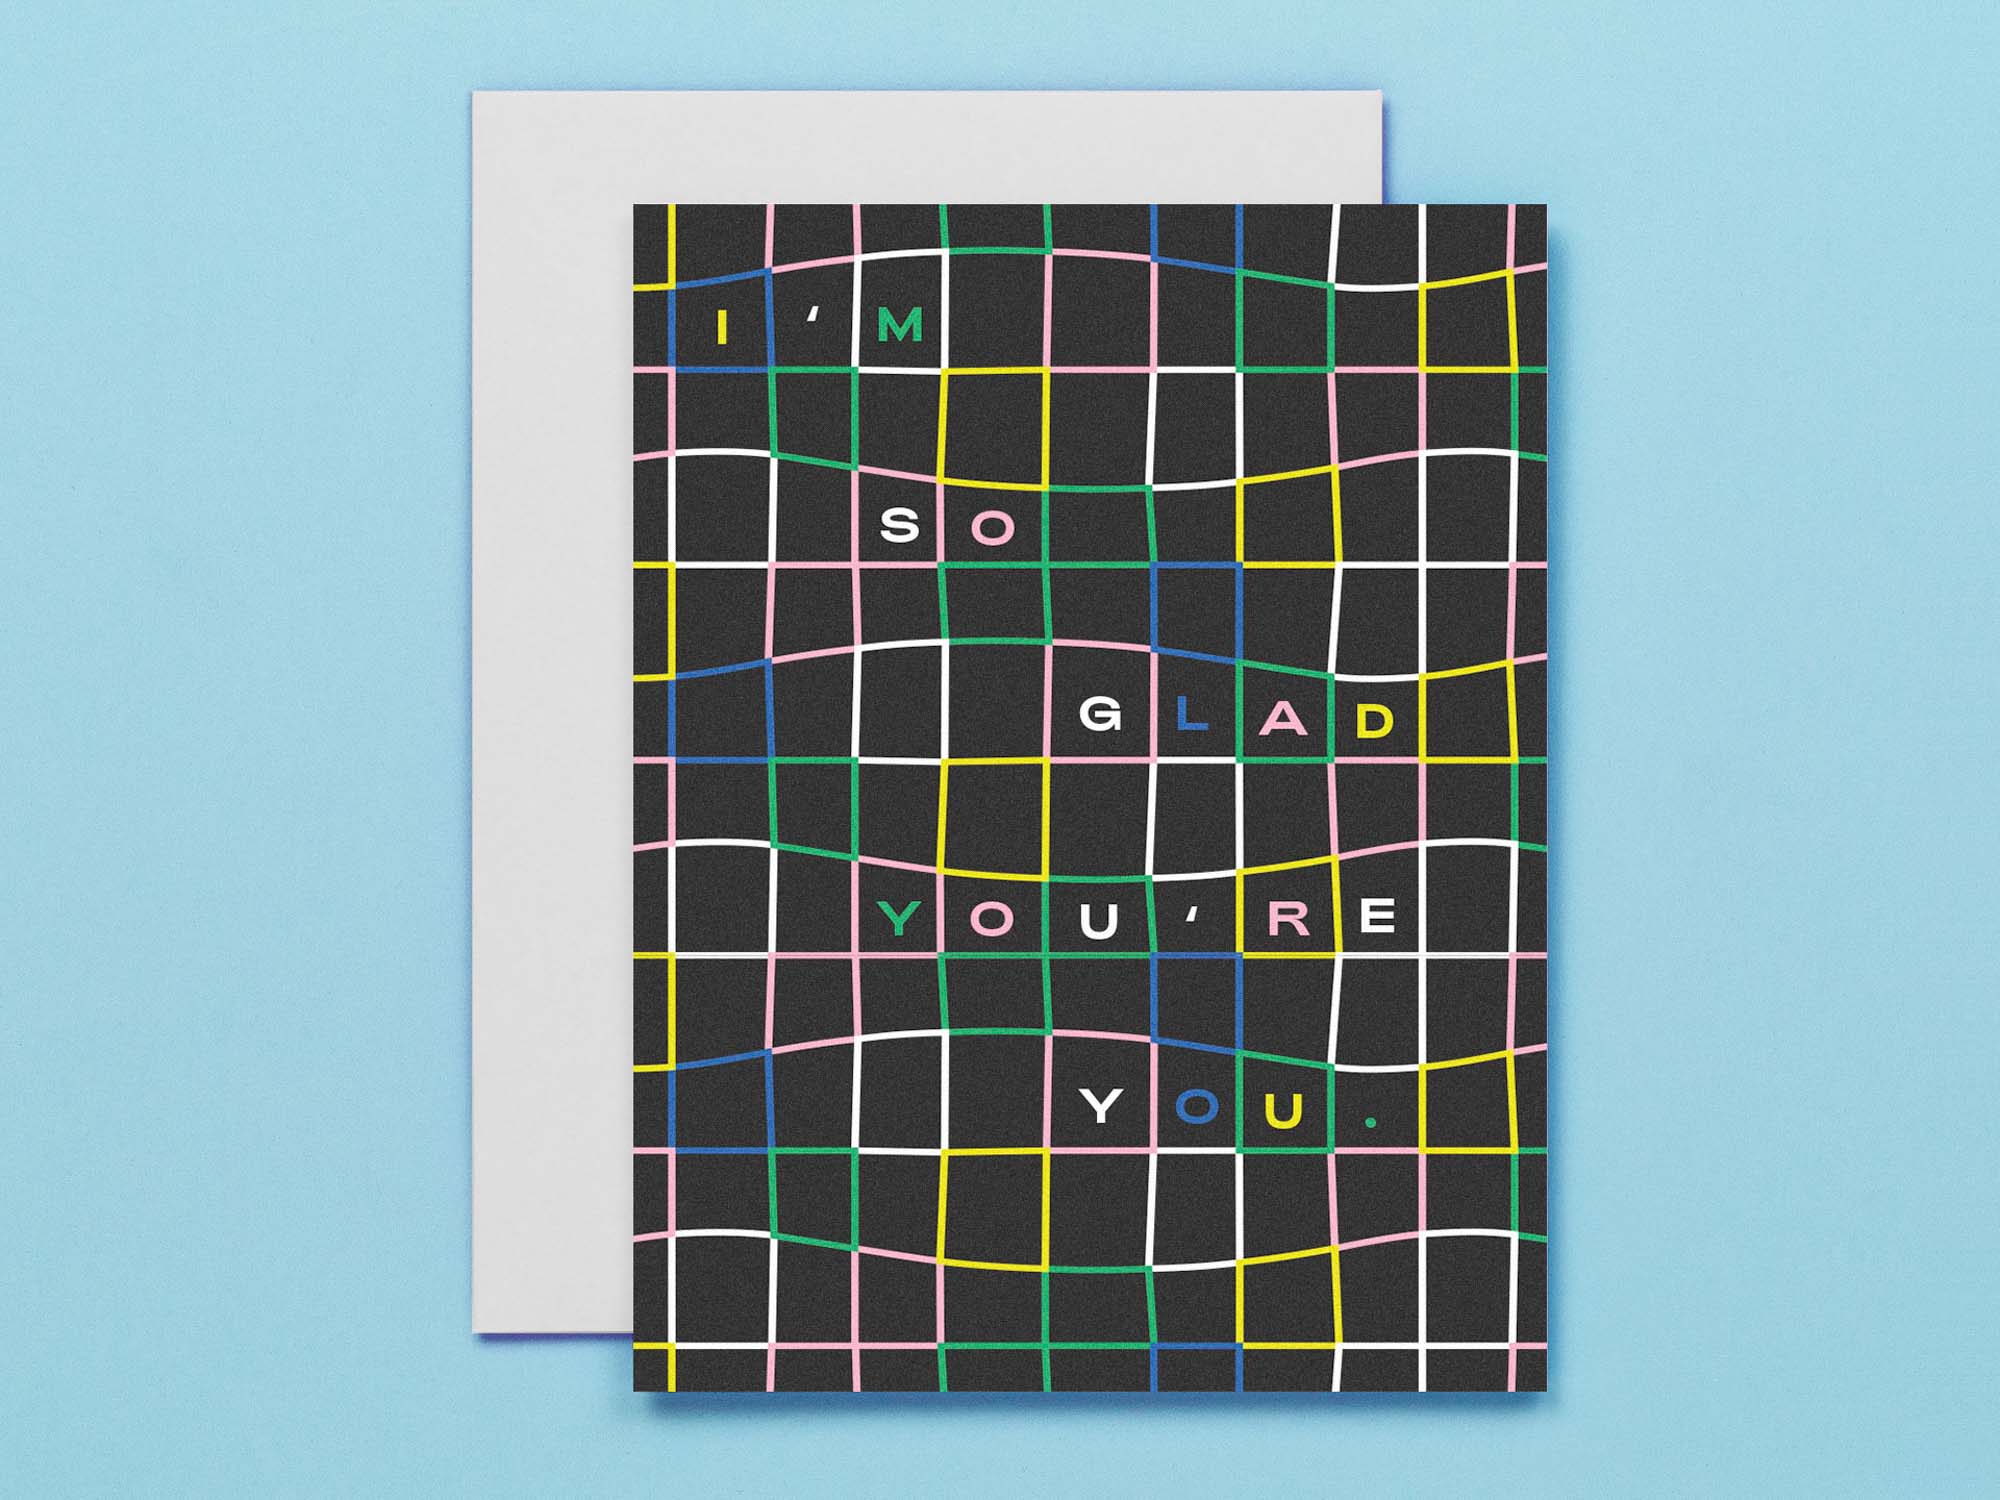 "I'm So Glad You're You" love or friendship card with wavy checker grid pattern. Made in USA by @mydarlin_bk